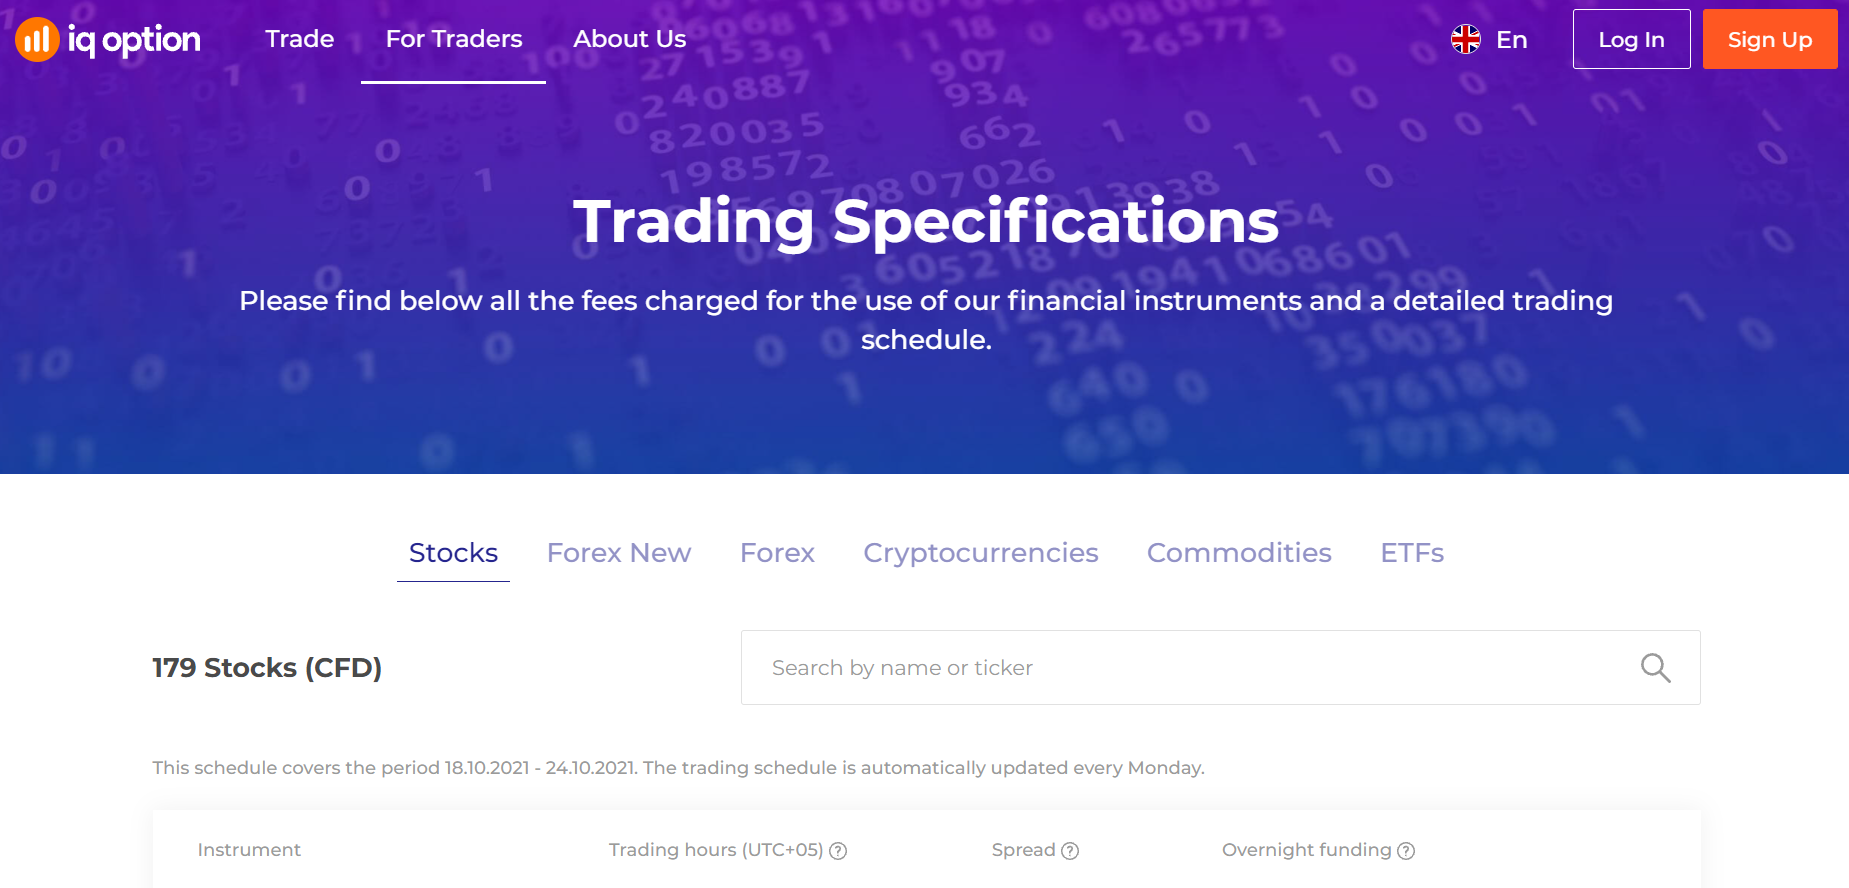 IQ Option Trading specifications